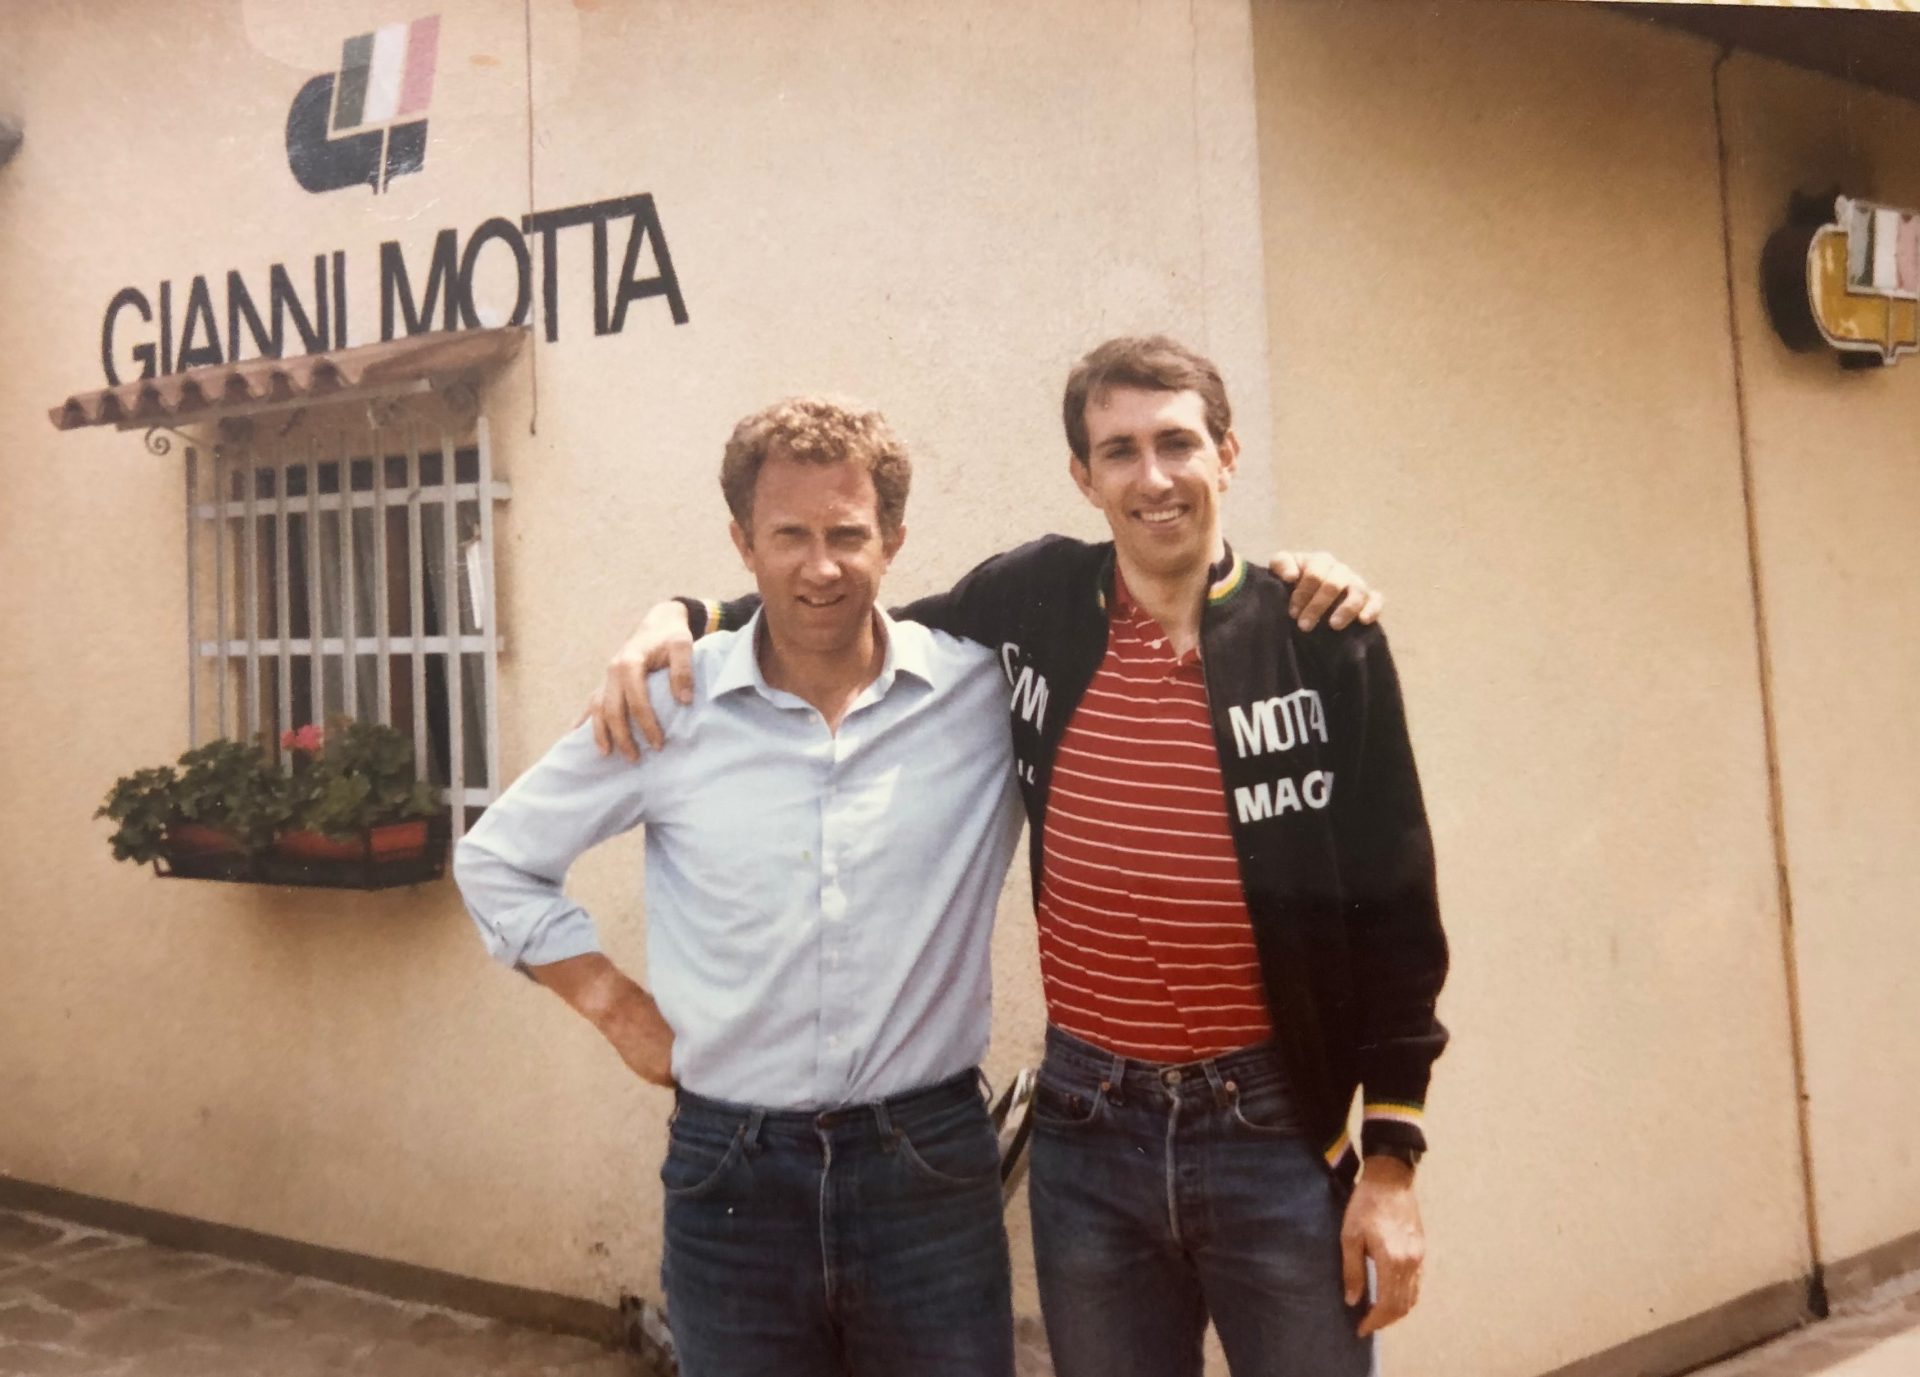 Tim Rutledge stands arm in arm with Gianni Motta for a picture outside the Motta factory. Rutledge is tall and boyish-looking, and is wearing a Motta-branded trainer jacket and jeans and has a wide smile. Motta is slightly shorter, with a confident bearing and slight smile, dressed in a light blue button down and jeans.